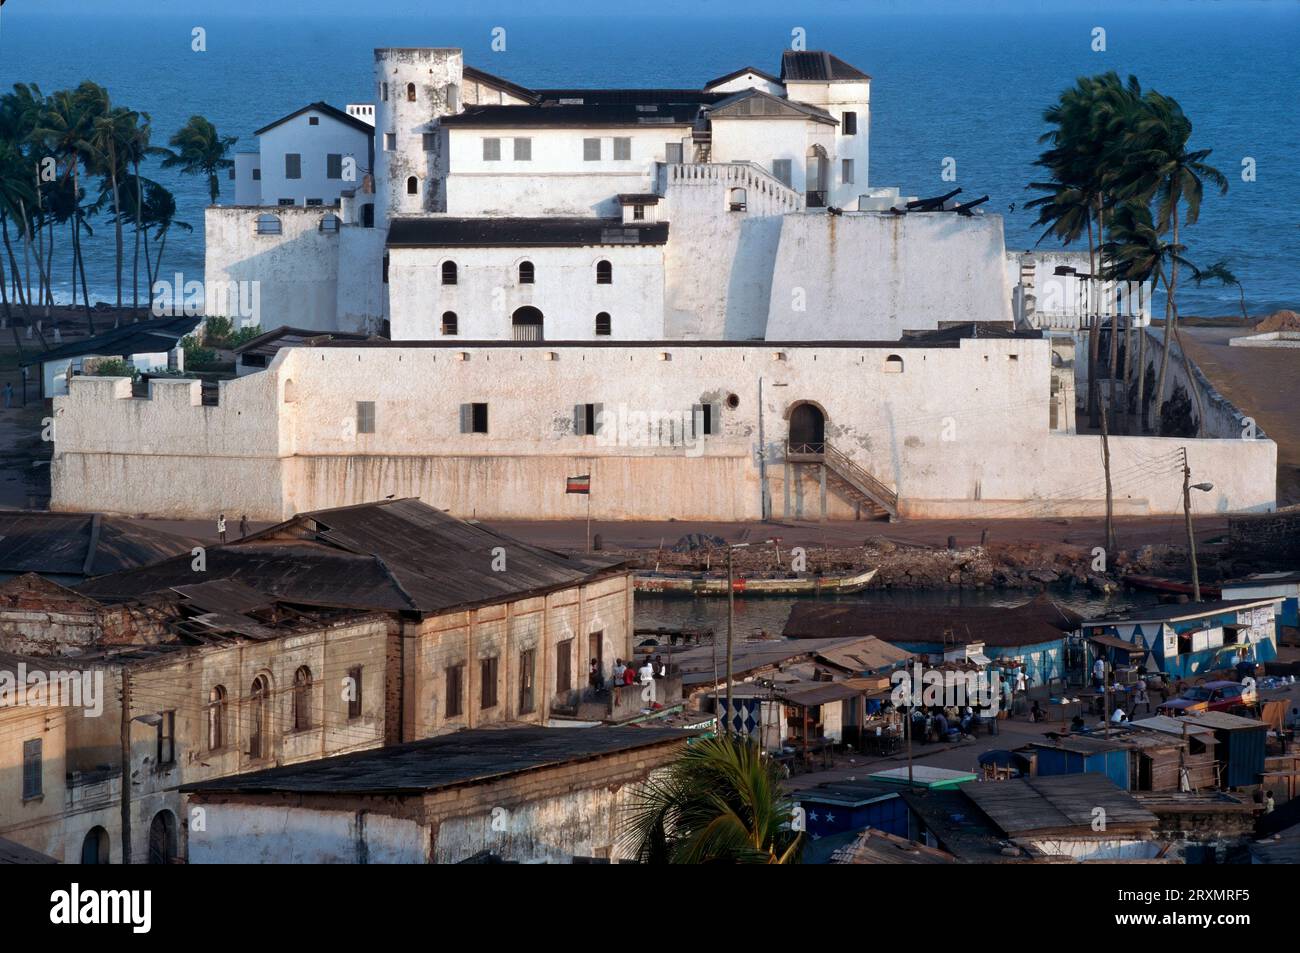 GHA, Ghana: Fort Elmina. Built by the Portuguese in the fifteenth century and later owned by the Dutch and the English, Fort Elmina held Africans before shipment to the slave markets of the Americas. Stock Photo